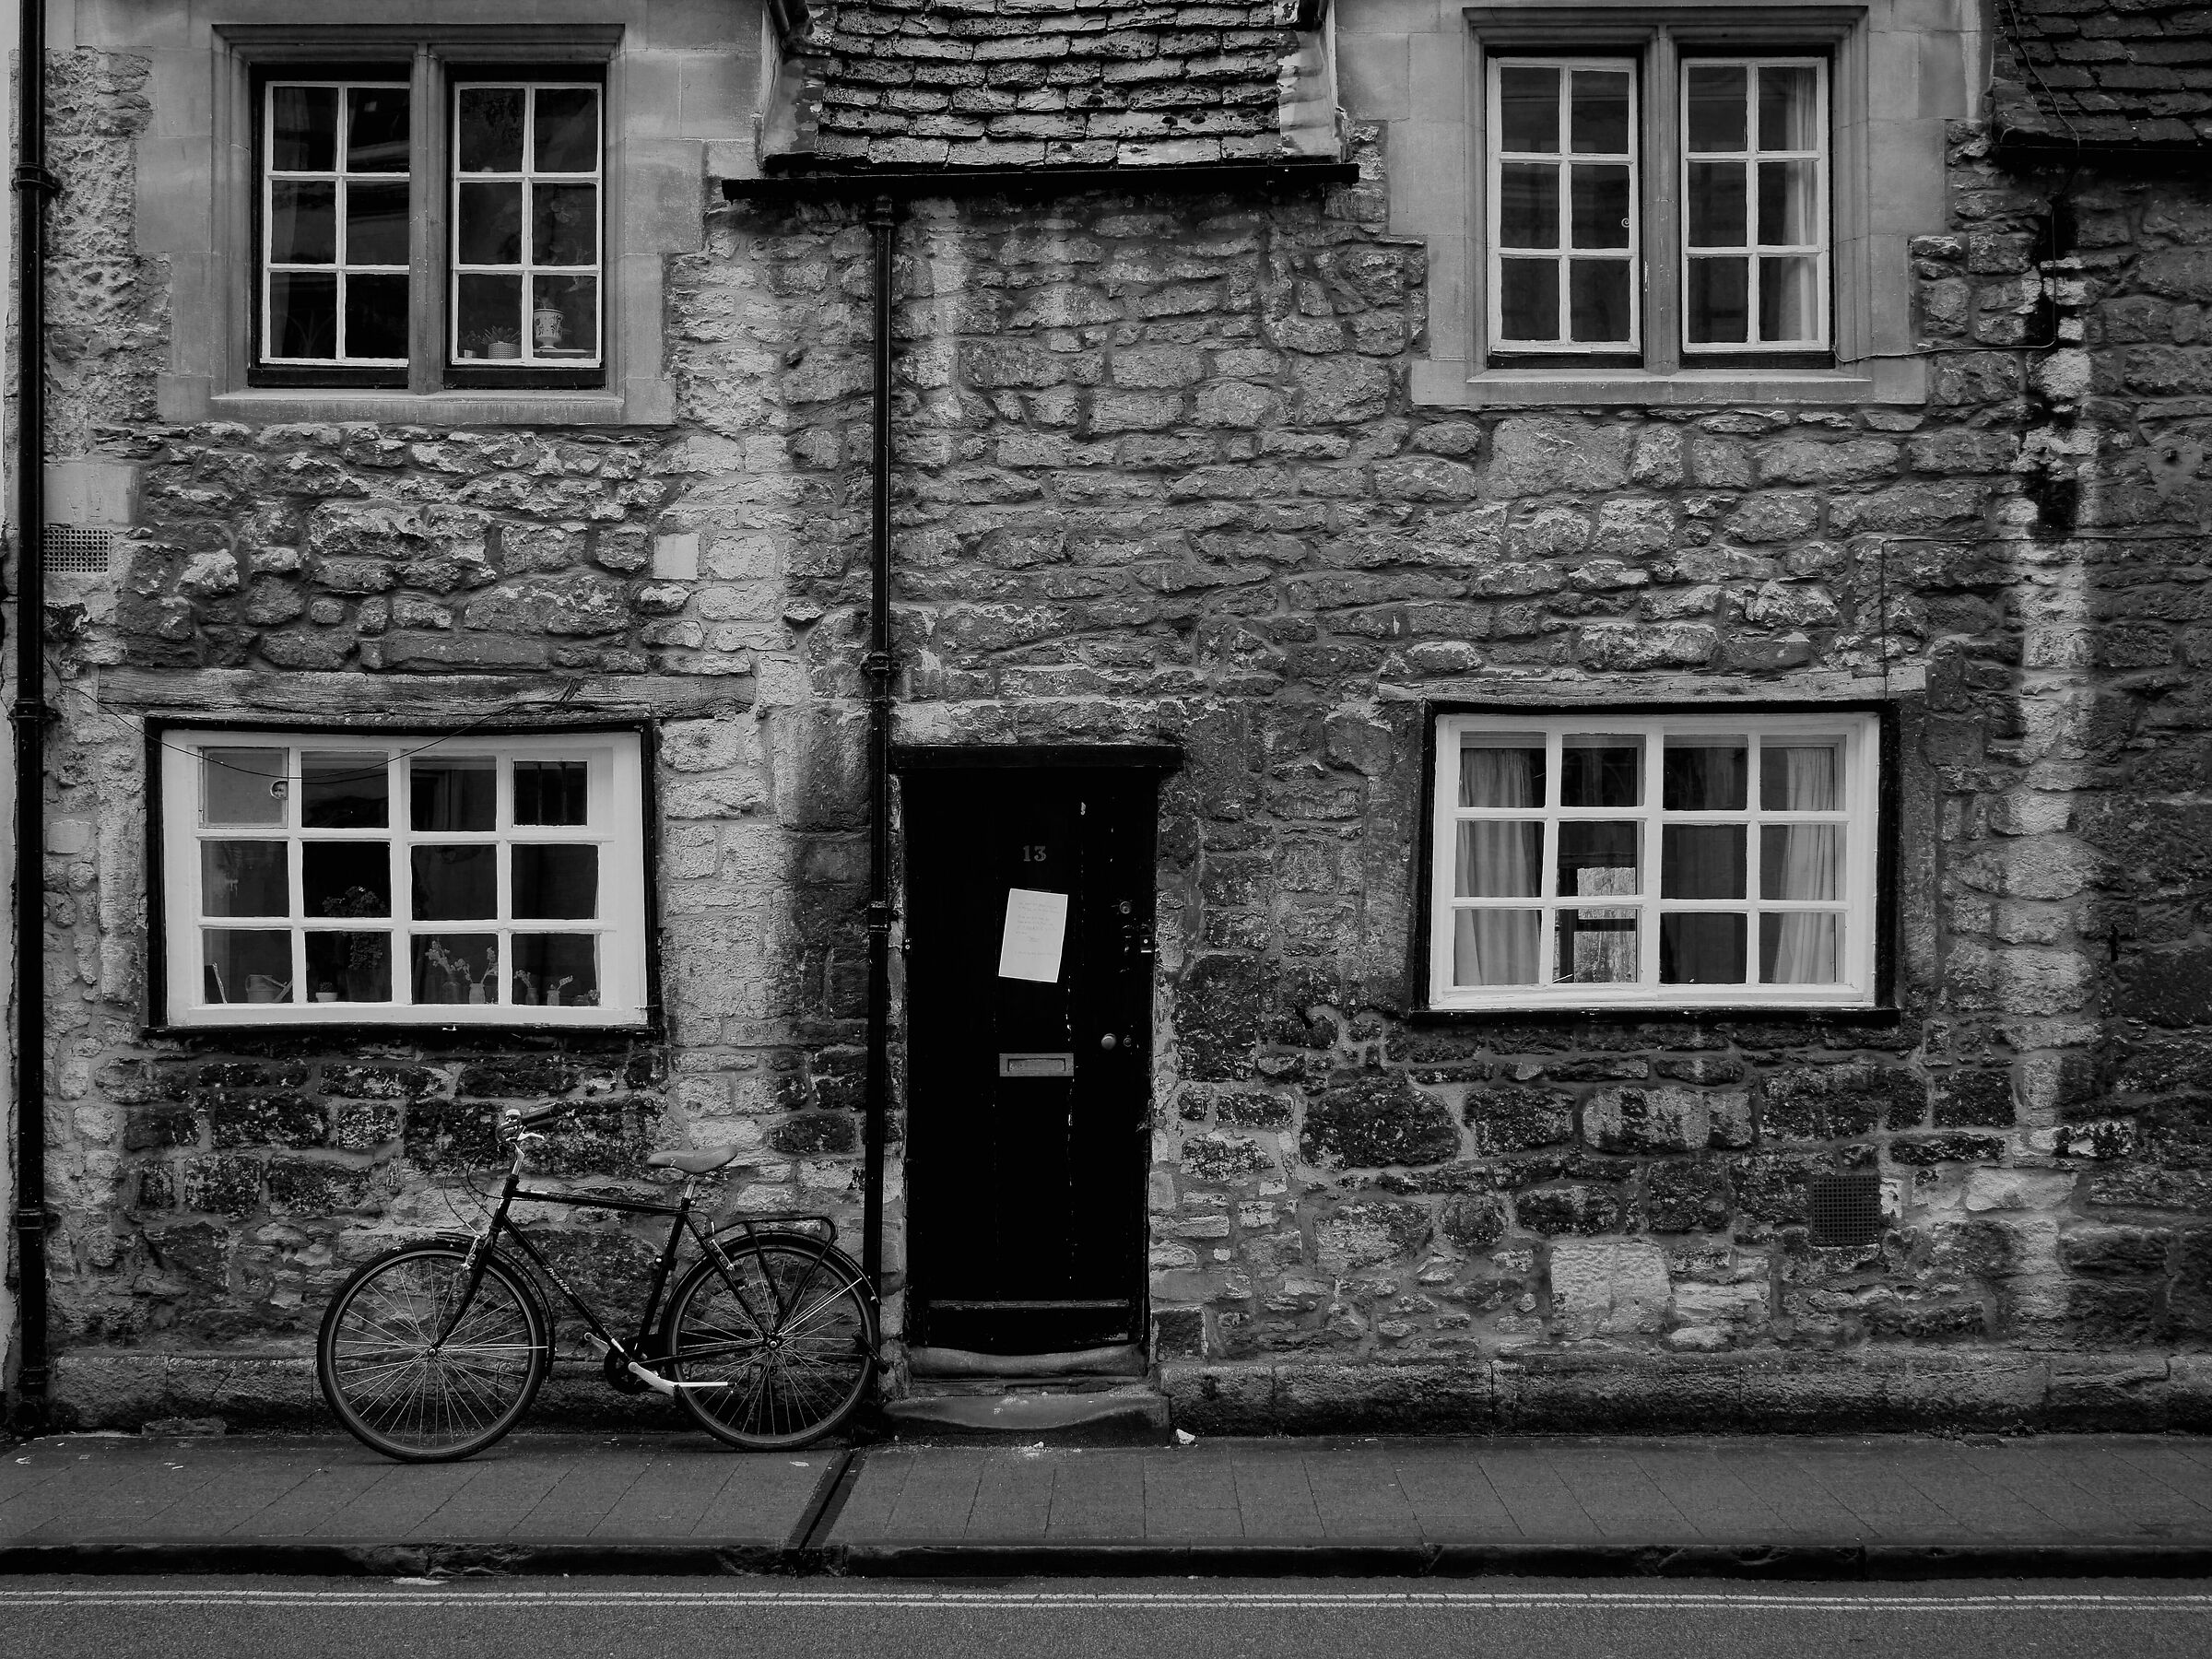 Oxford #004 - The Old House...